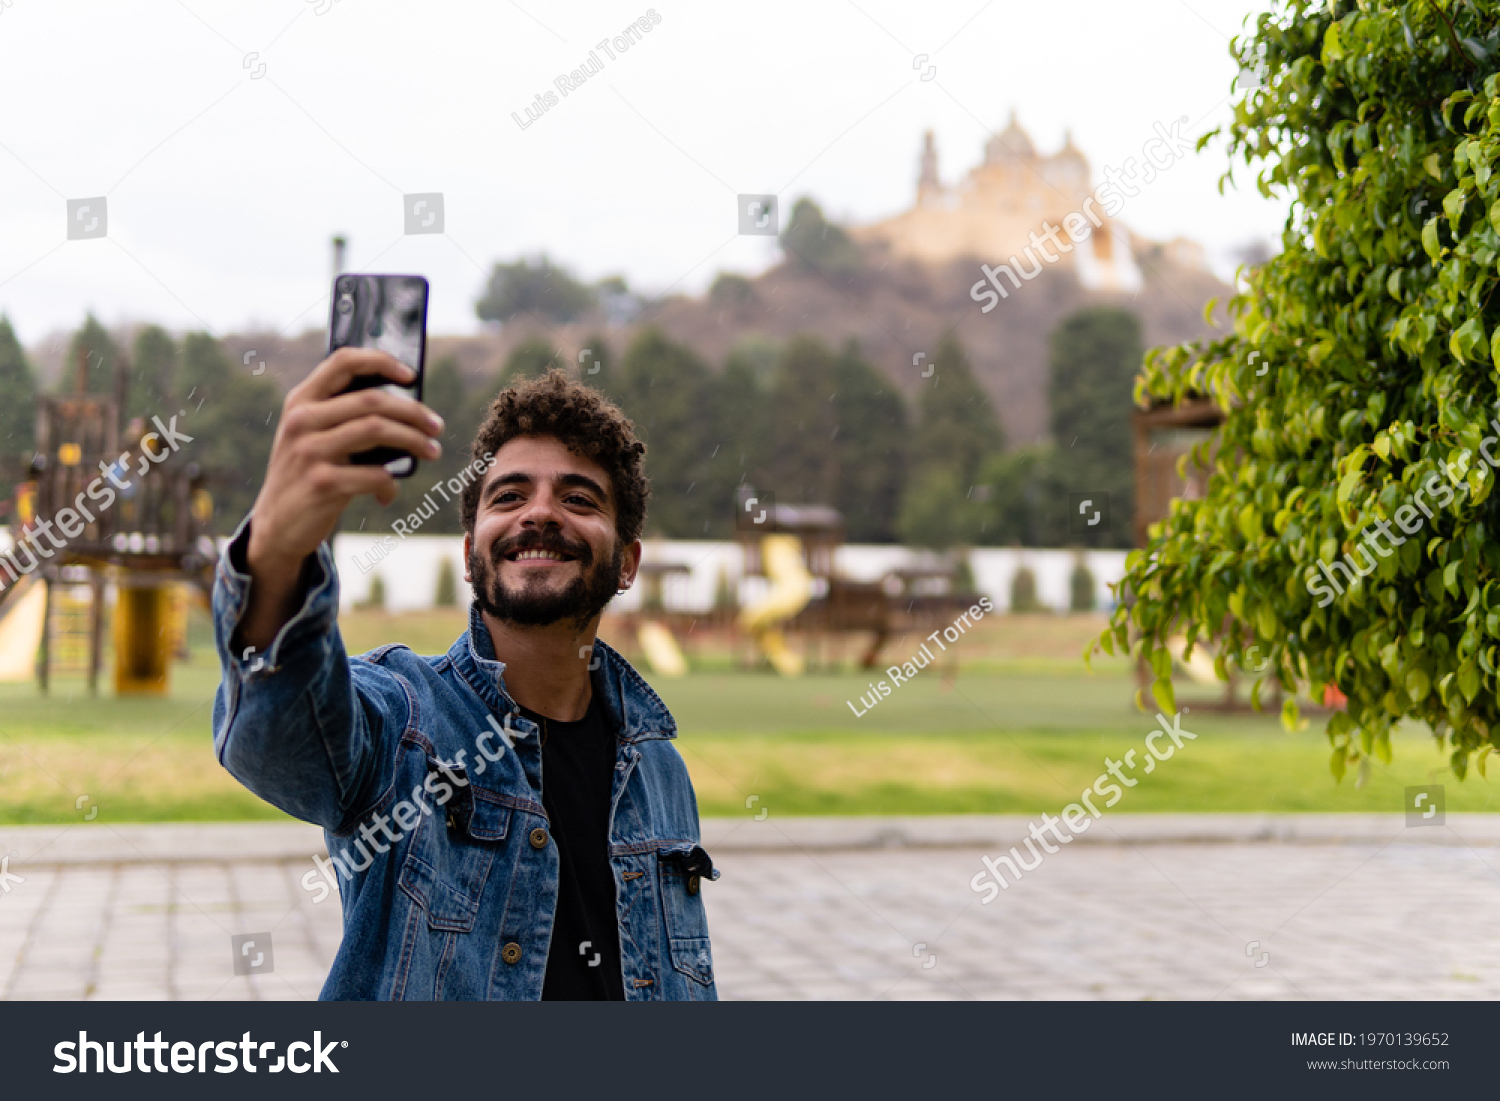 Handsome young man with curly hair and a beard wearing denim and taking a selfie with his smartphone in the pyramid of Cholula, Mexico. #1970139652